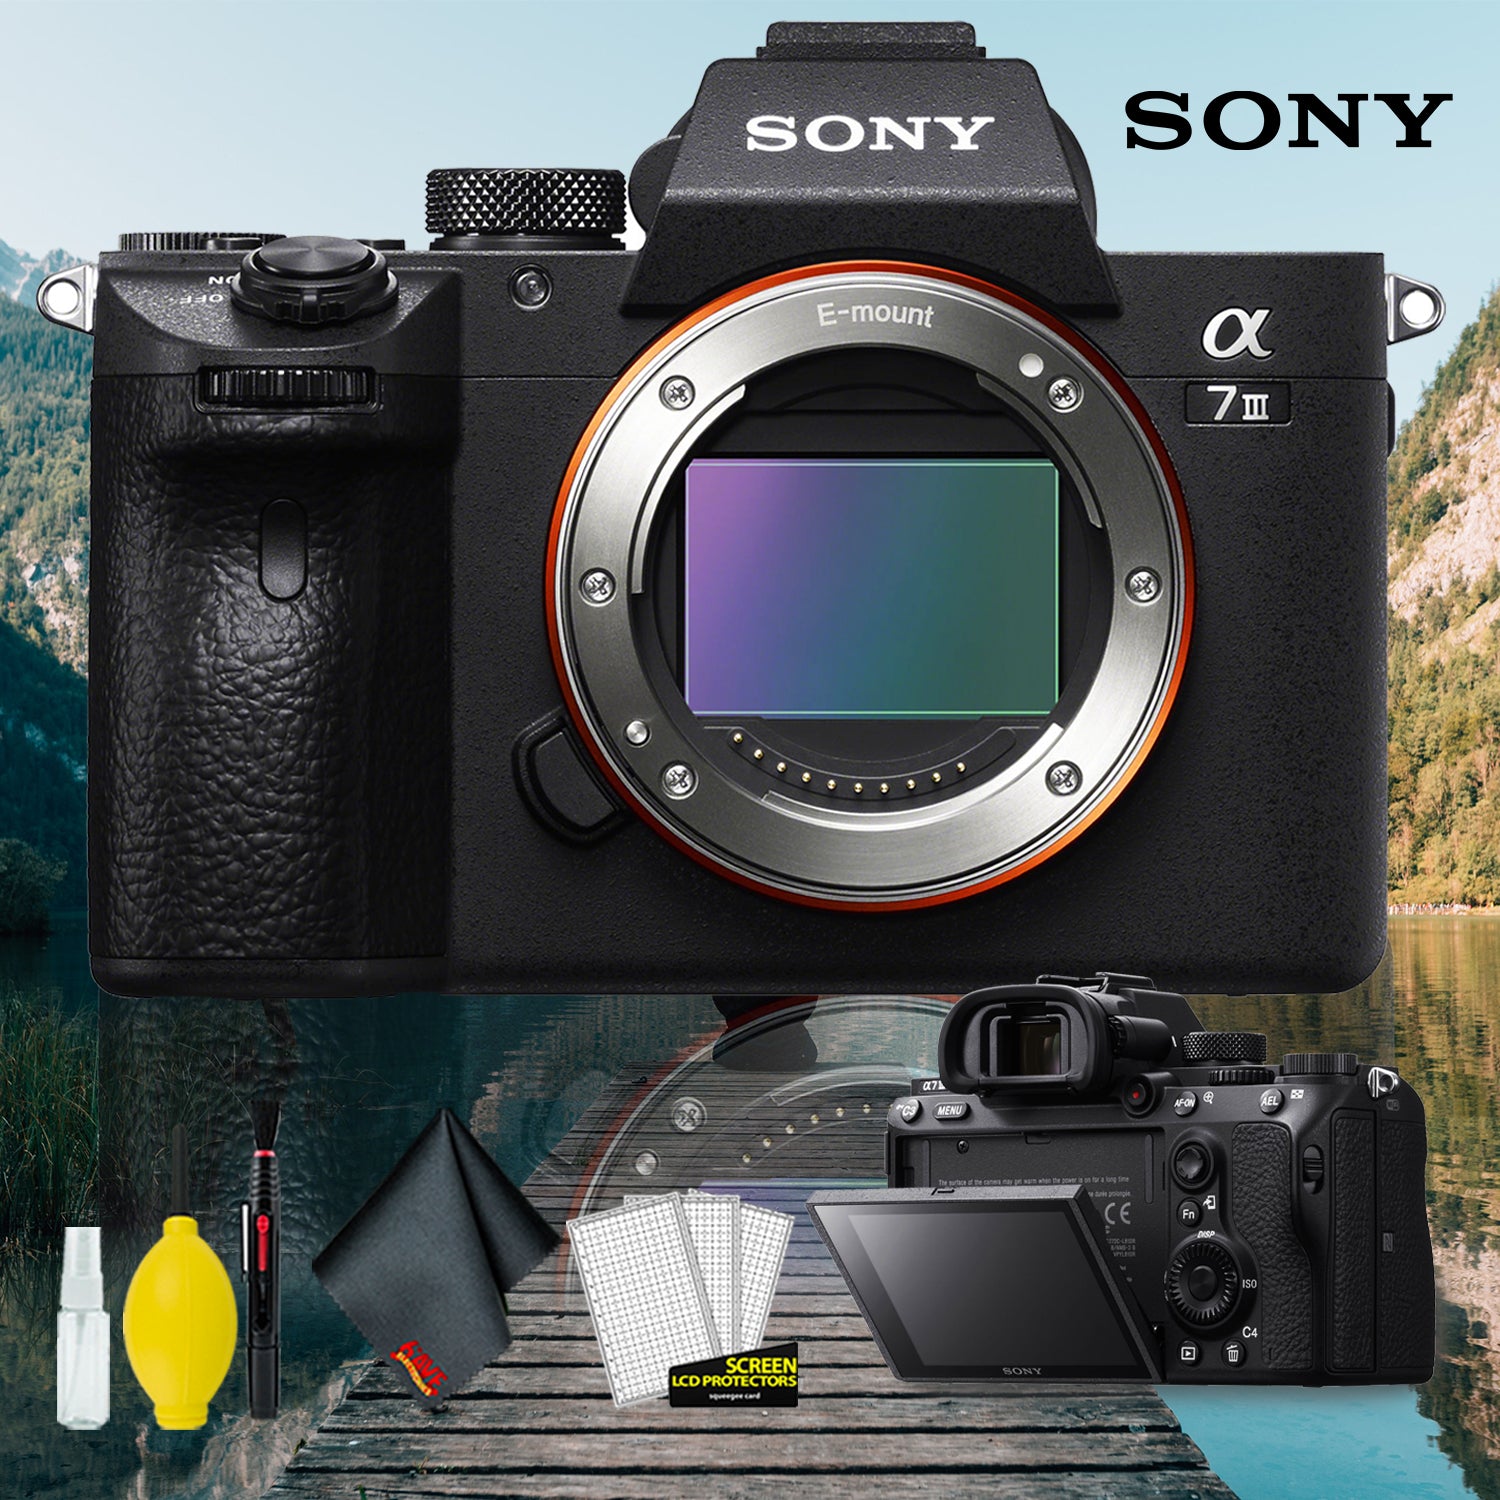 Sony Alpha a7 III Mirrorless Digital Camera (Body Only) with Camera Cleaning Kit Bundle